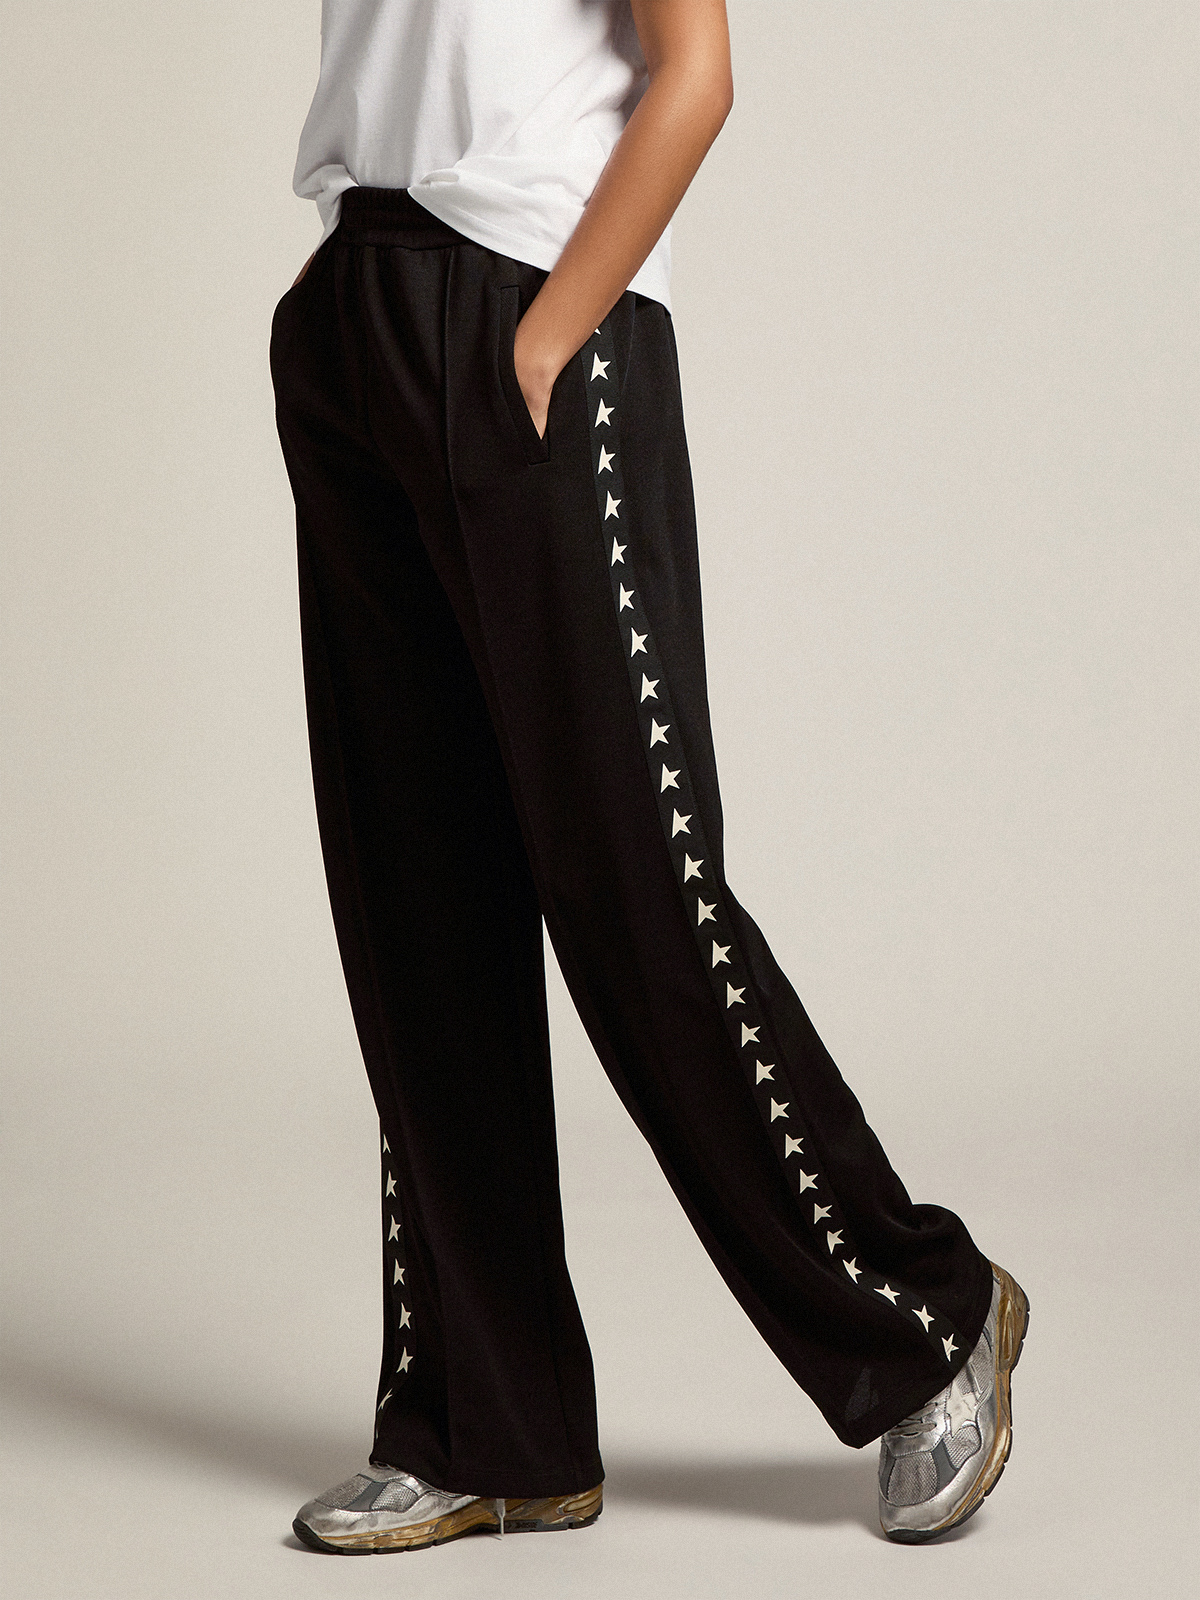 Women's black joggers with white stars on the sides | Golden Goose